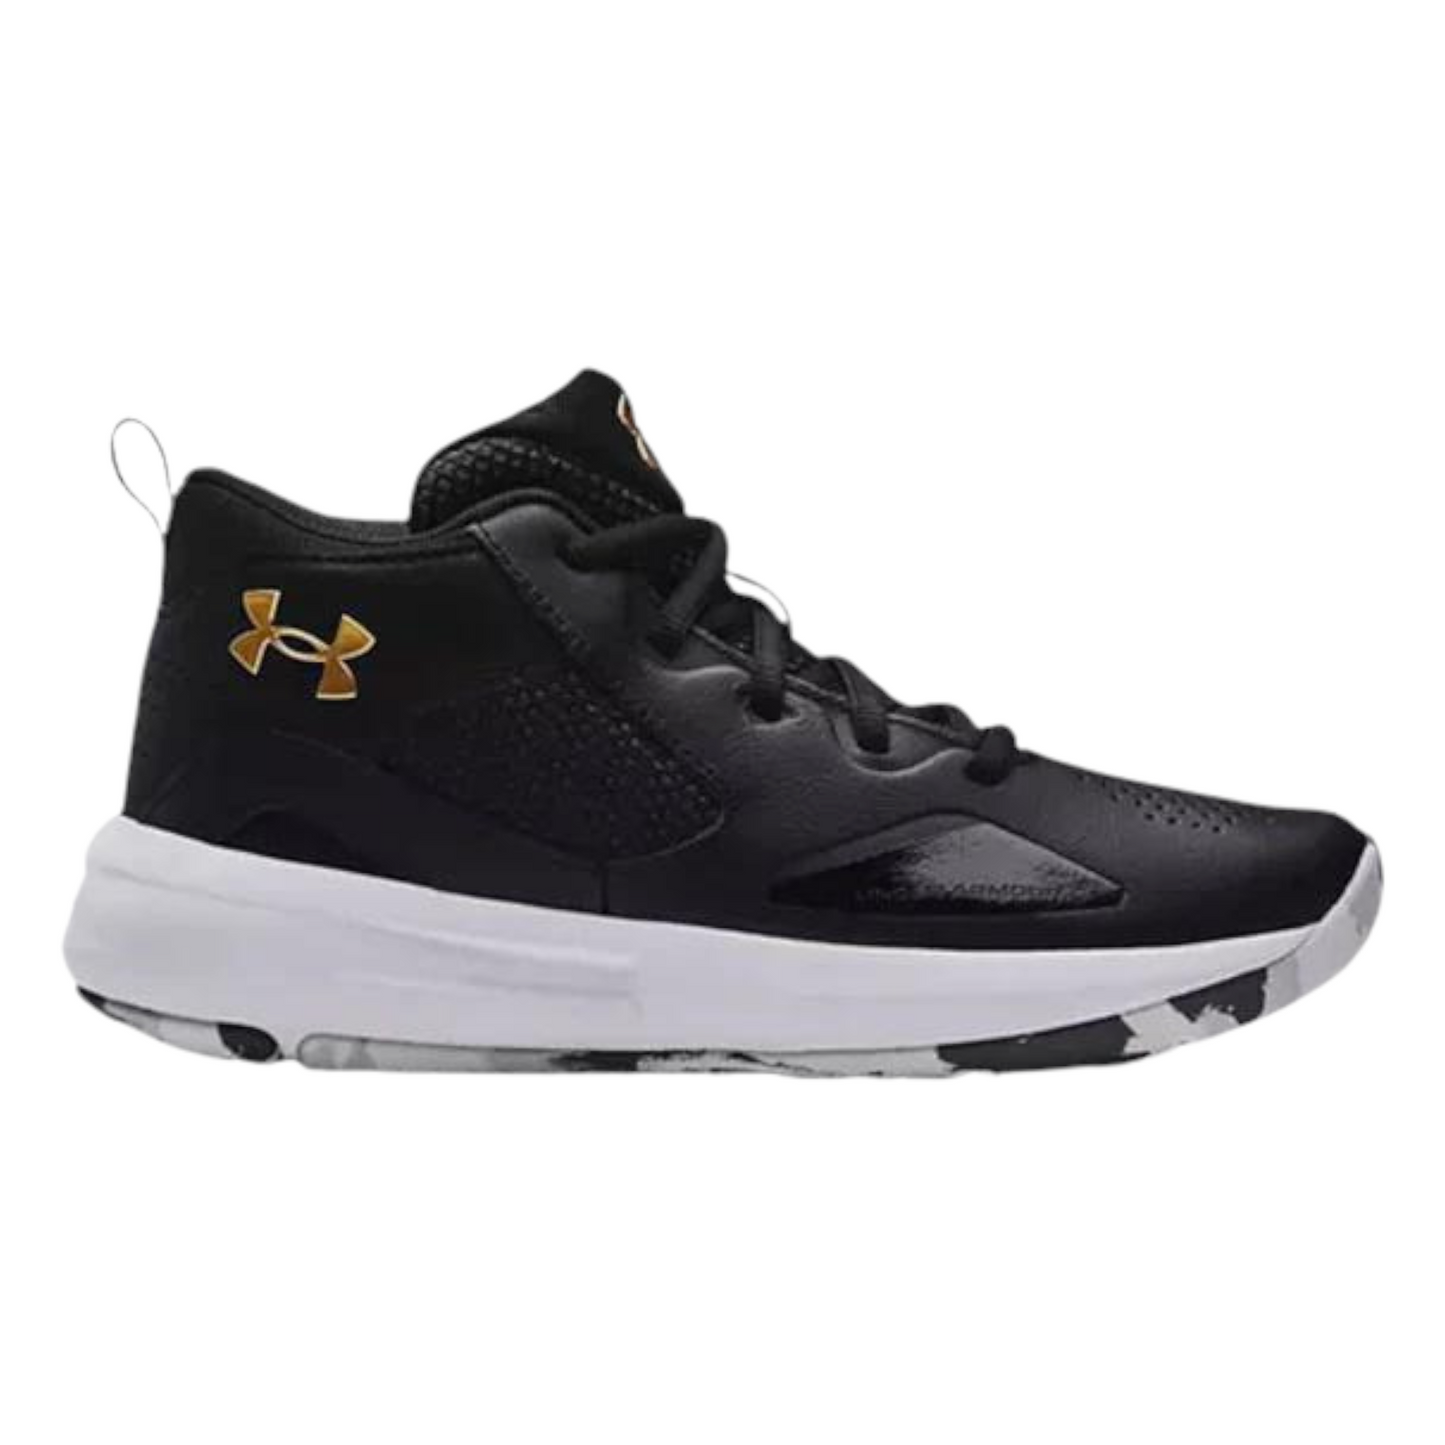 - Under Armour Youth Lockdown 5 Black/White/Grey (PS) - (3023533 003) - UL5 - R1L1